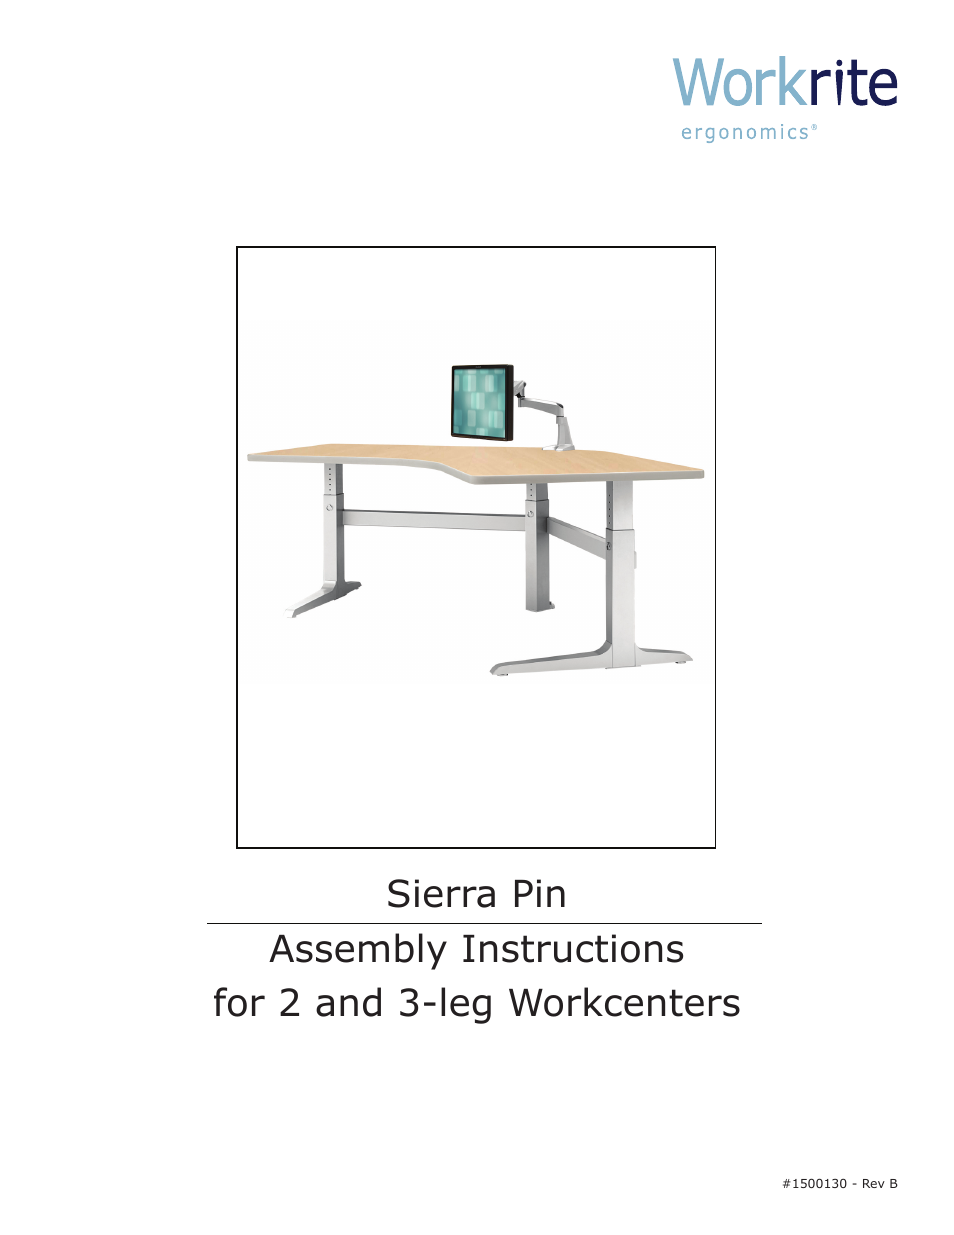 Sierra Pin Crank Assembly Instructions for 2-leg Workcenters